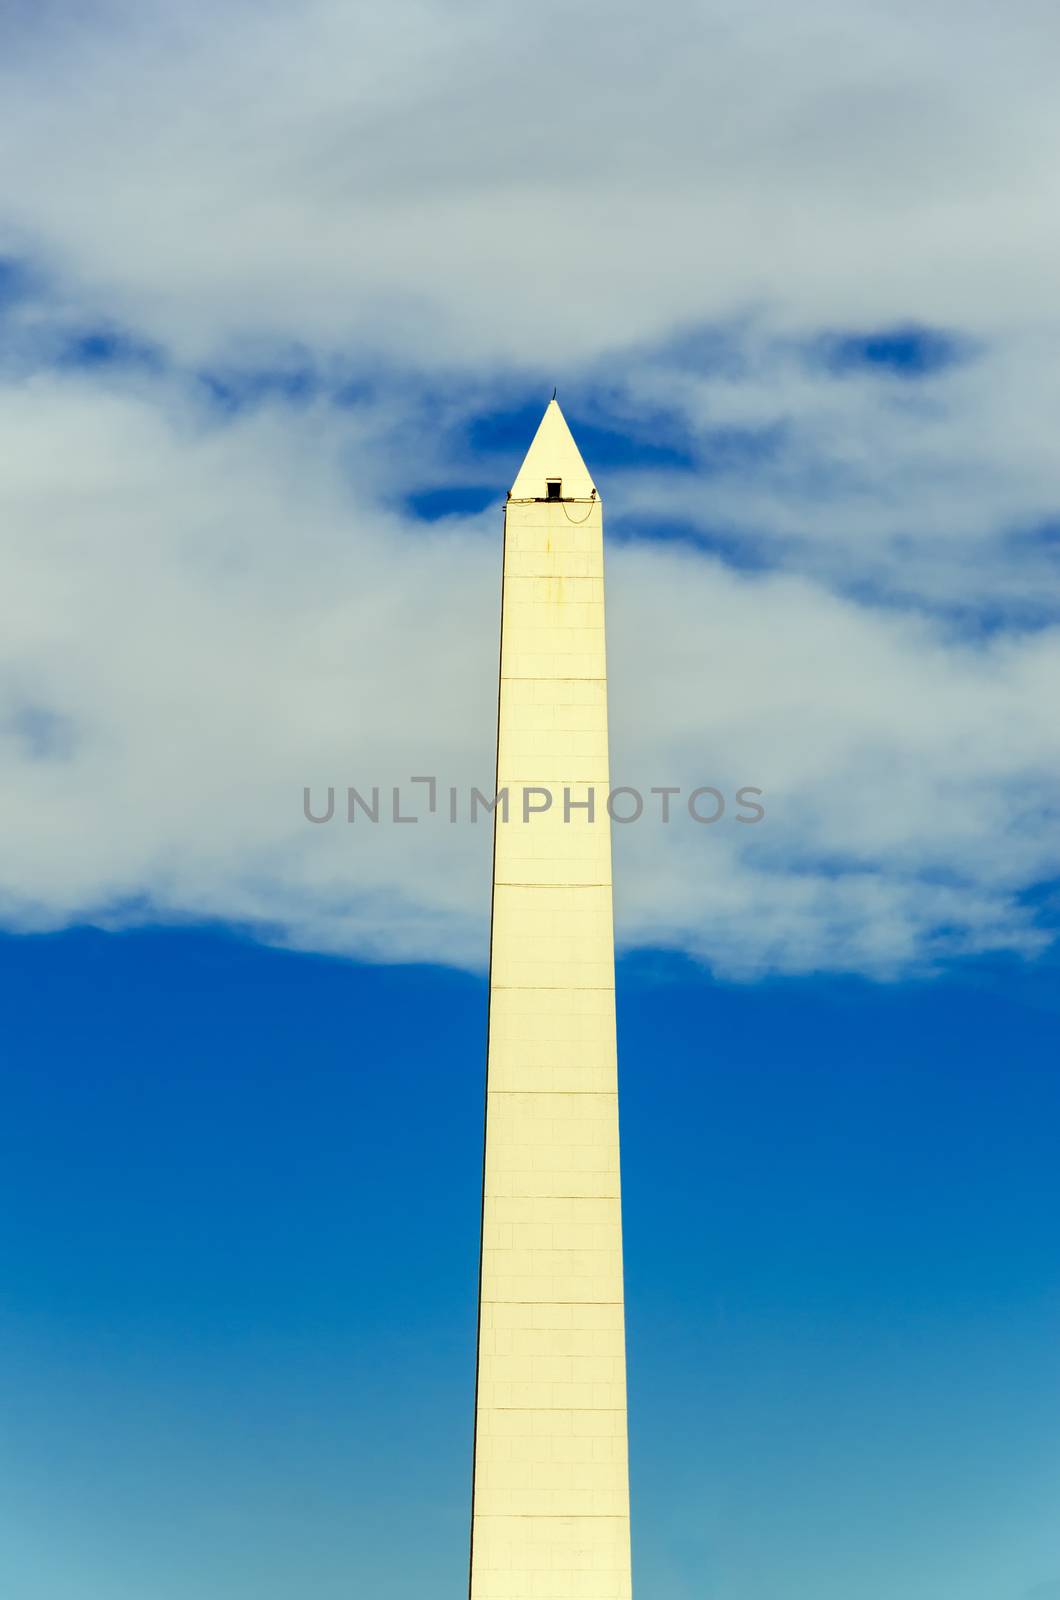 The obelisk, a historic monument in Buenos Aires, Argentina